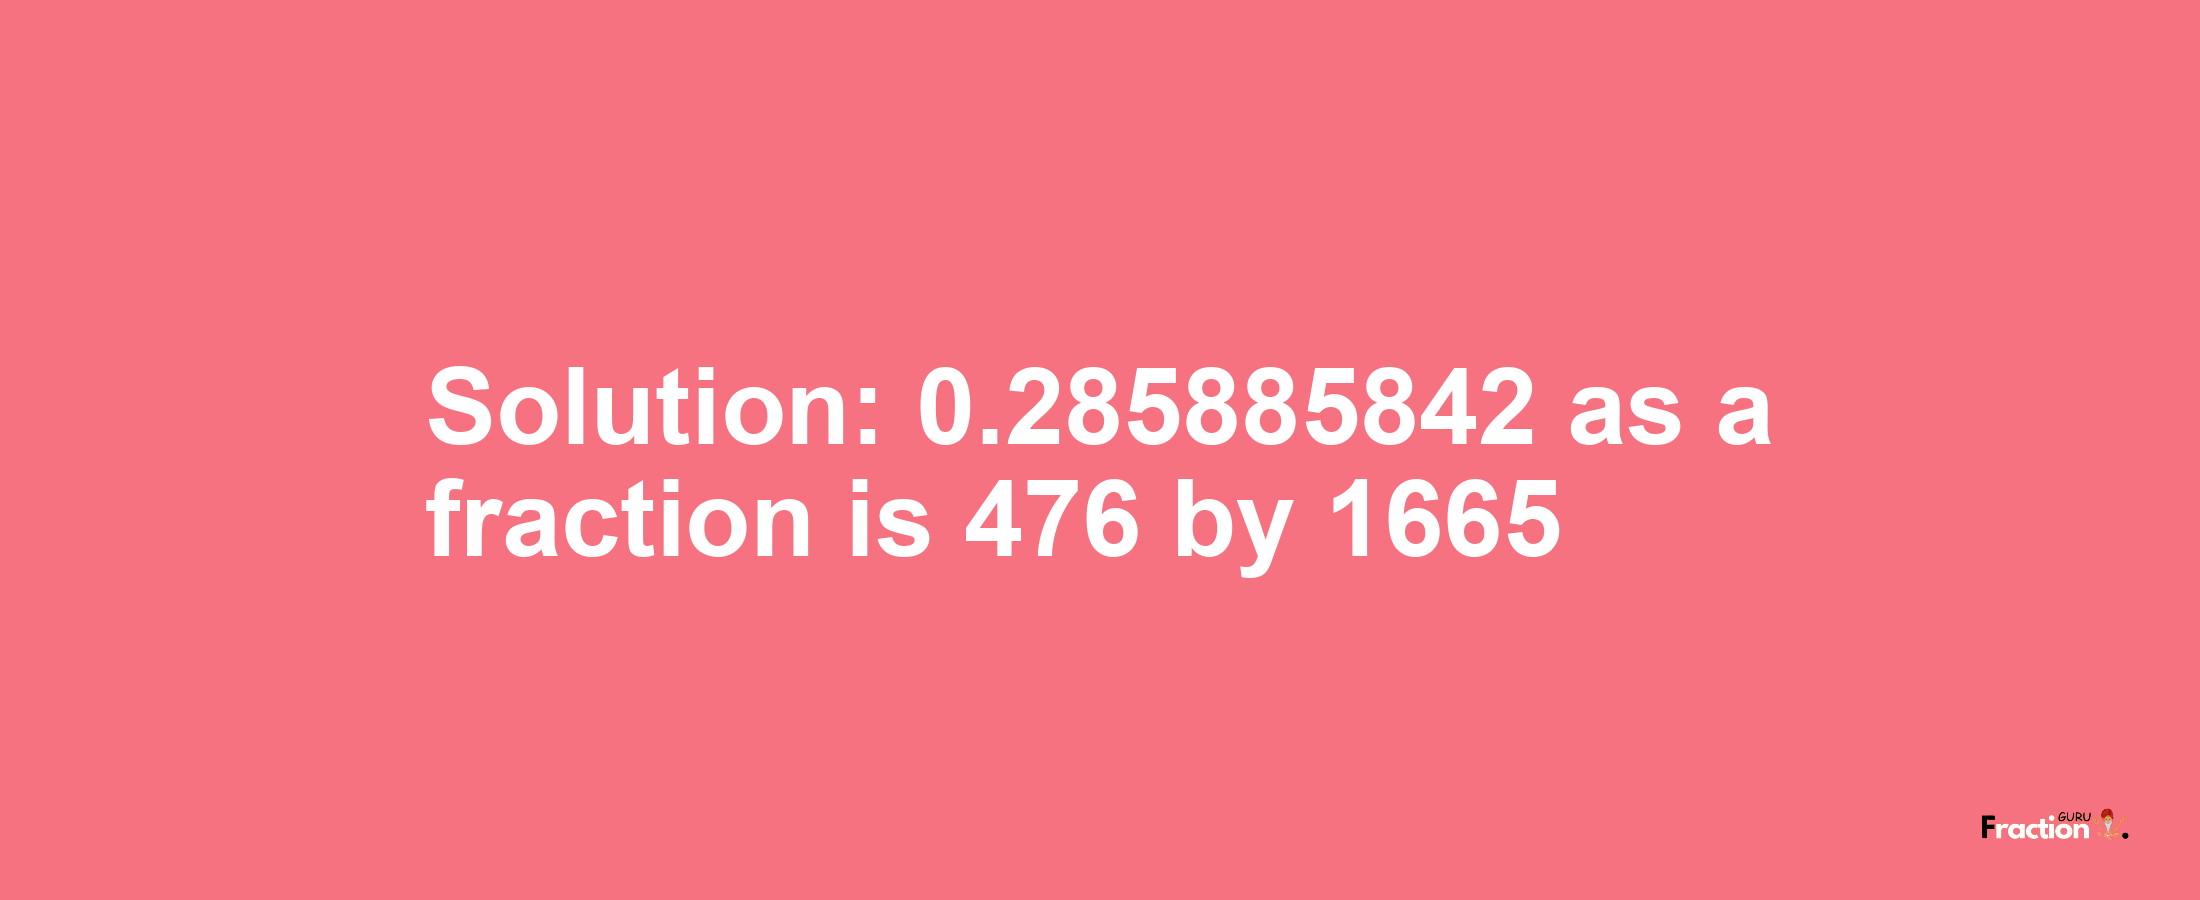 Solution:0.285885842 as a fraction is 476/1665